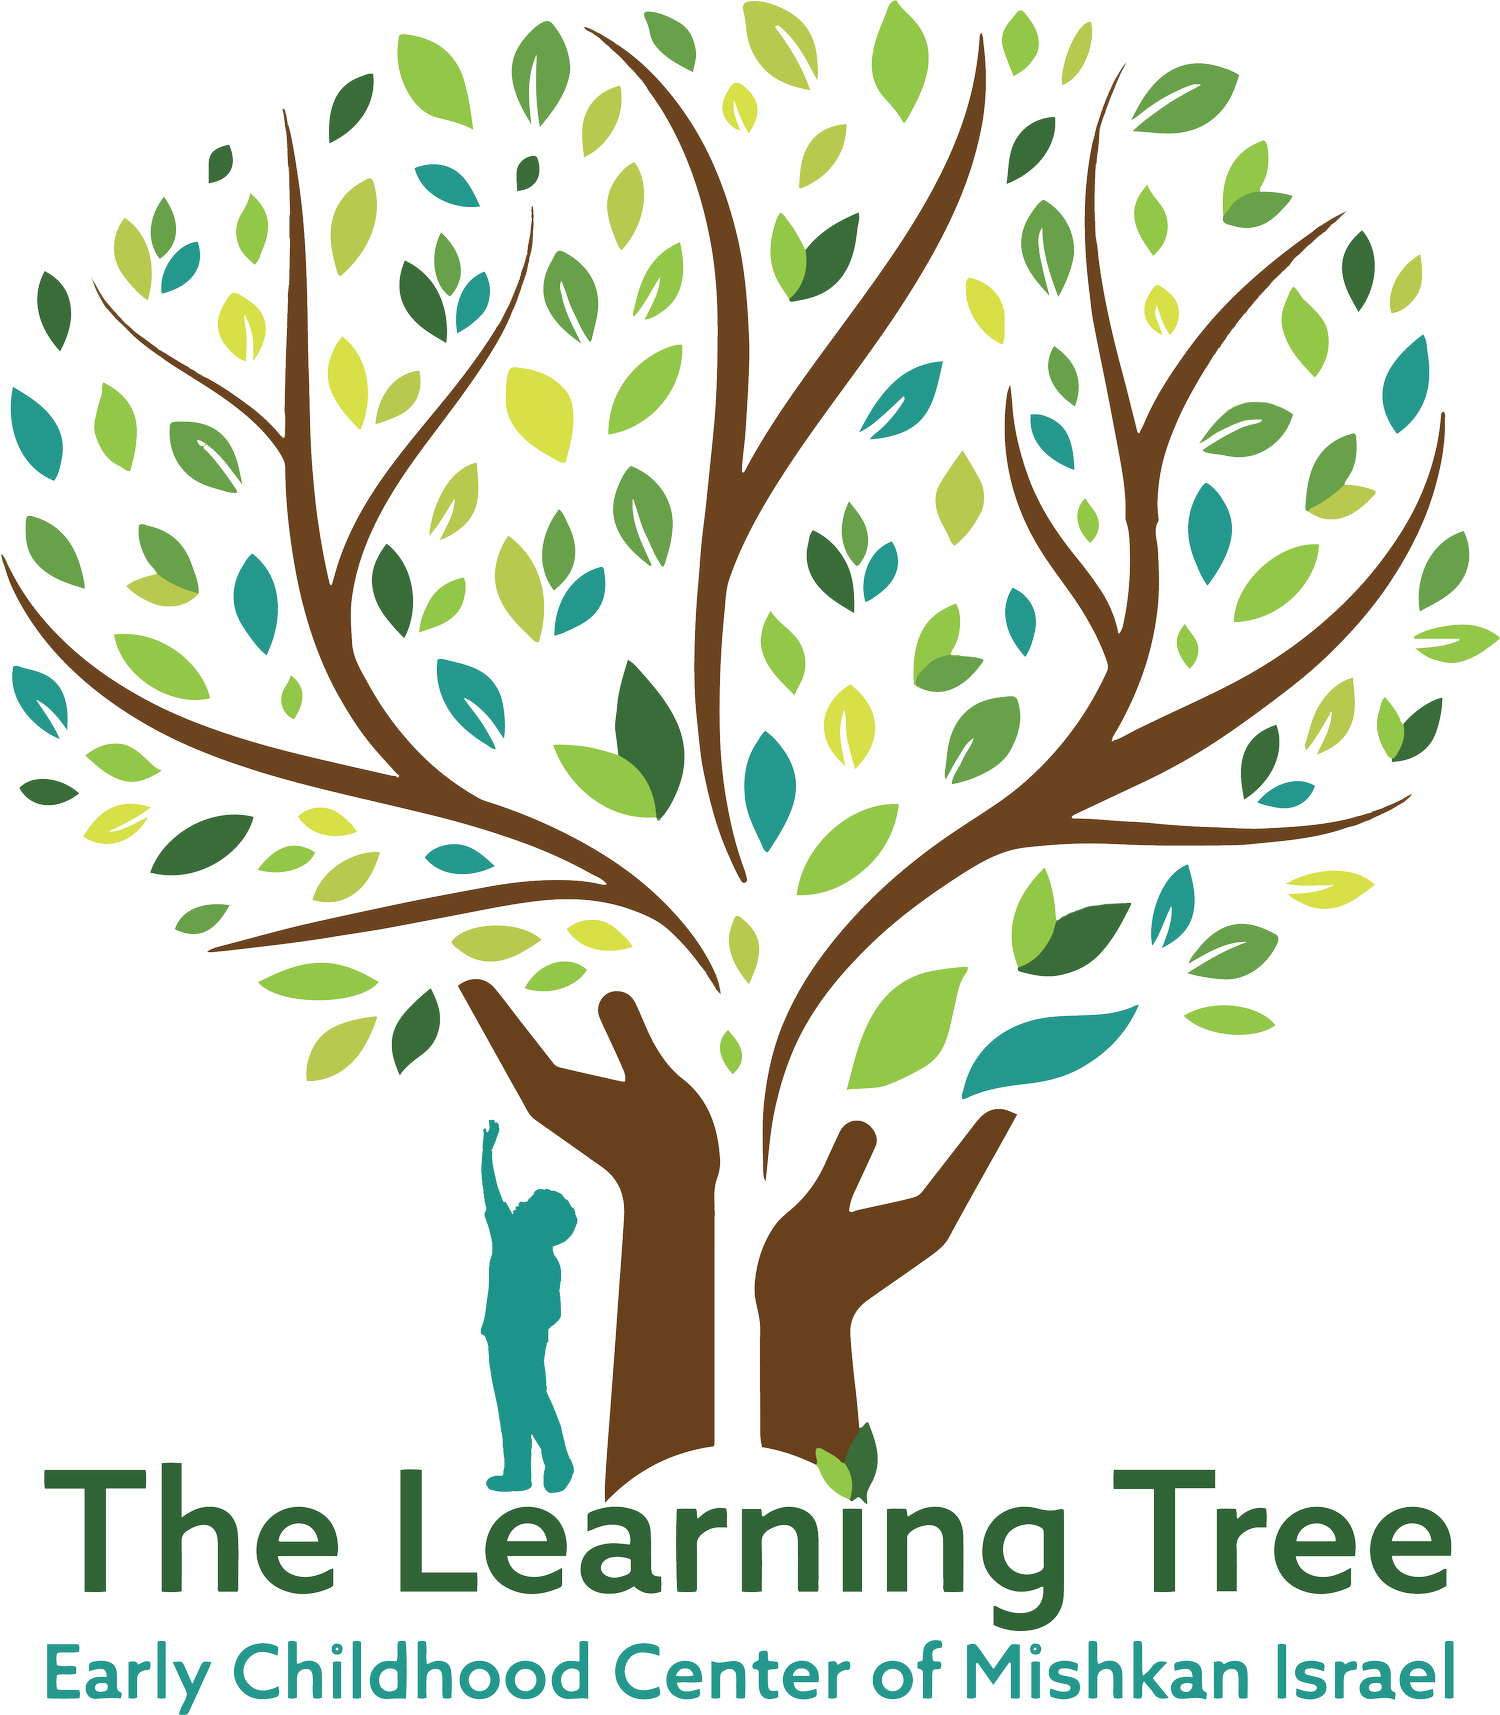 The Learning Tree Early Childhood Center of Mishkan Isarael